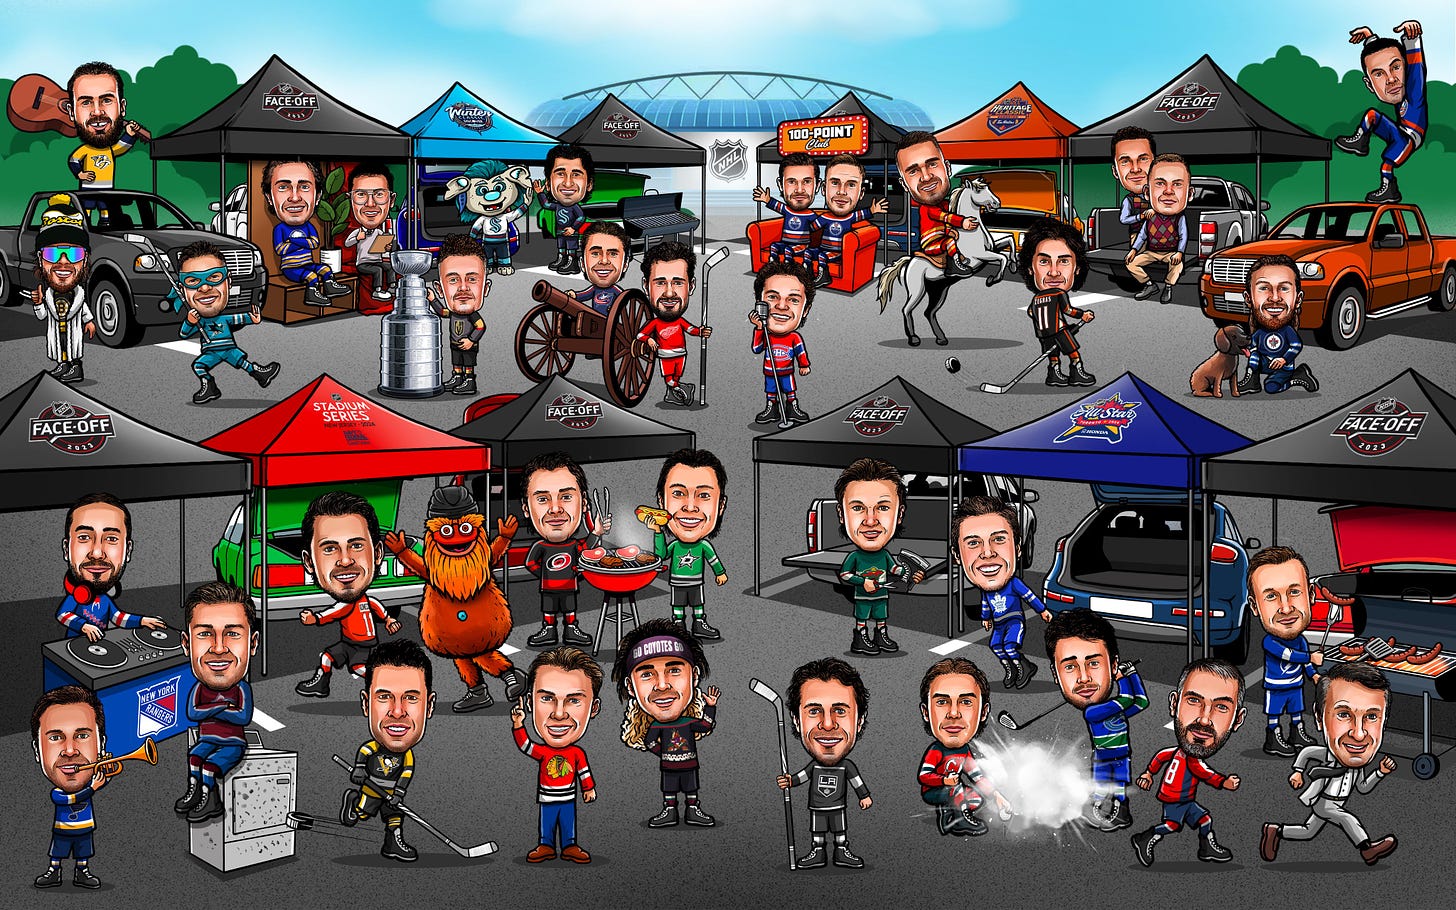 Digital illustration of players and easter eggs from all 32 teams and cities.